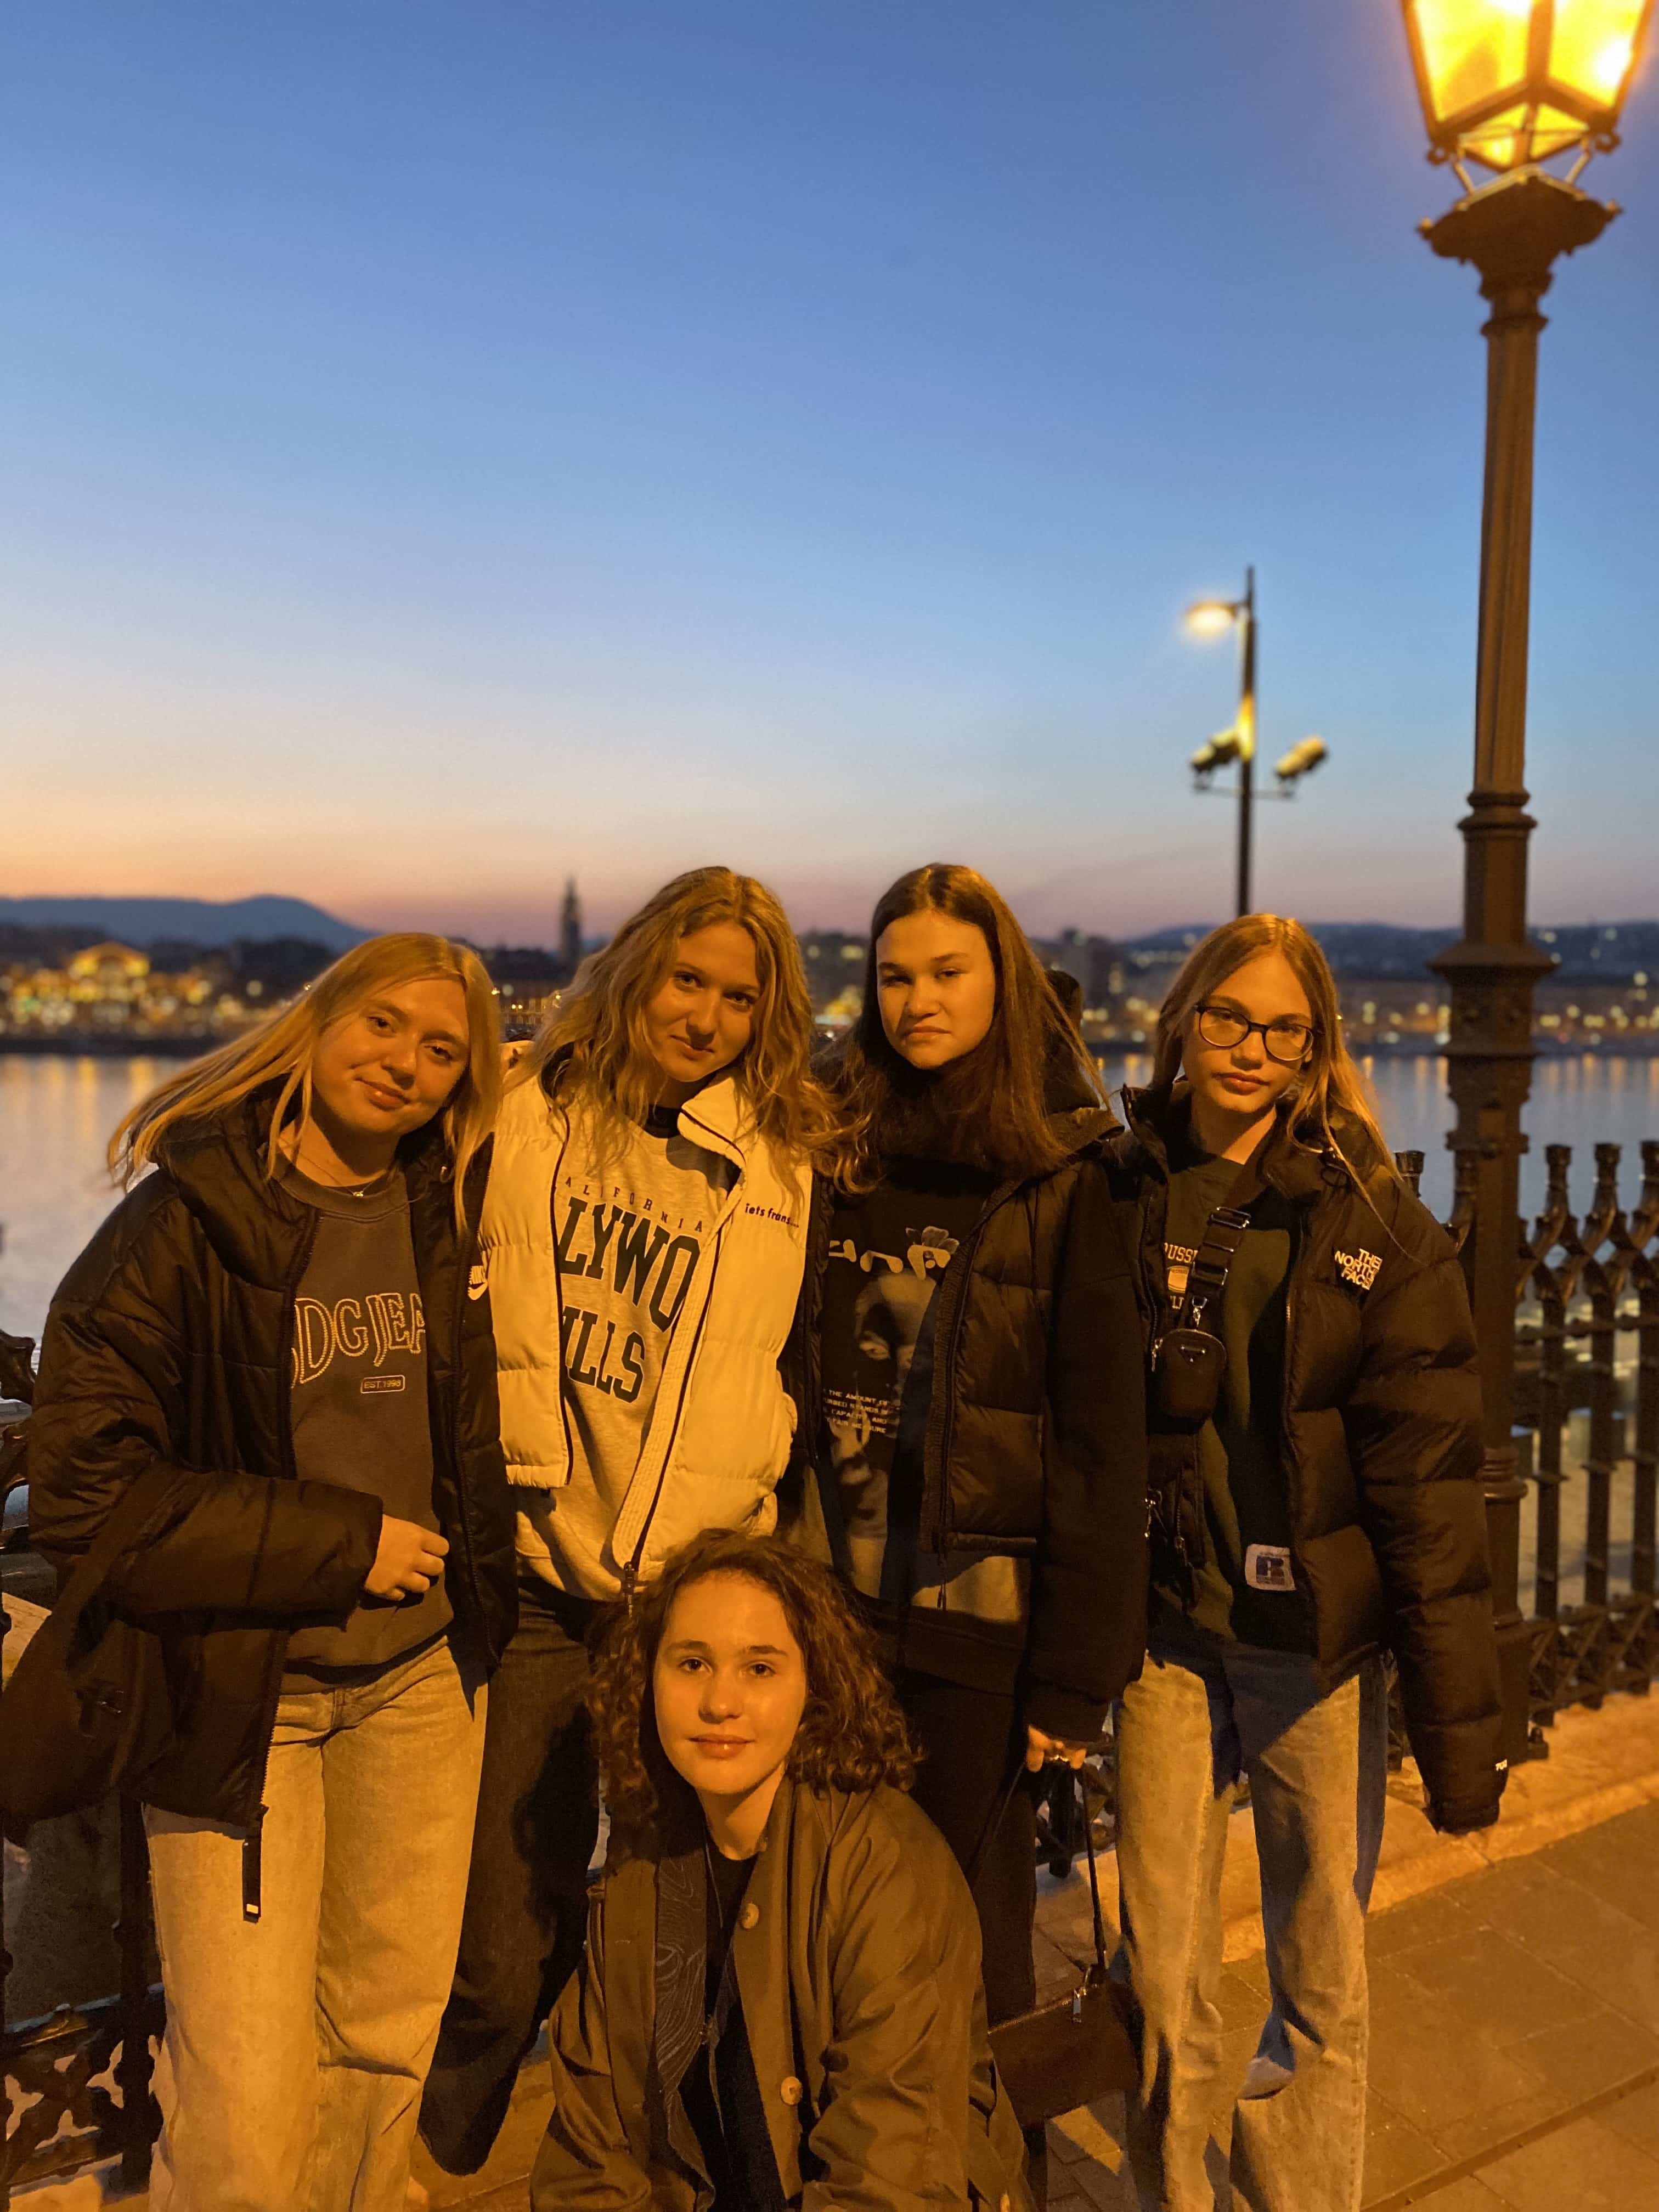 The Great Budapest Trip (March 3rd - March 4th)